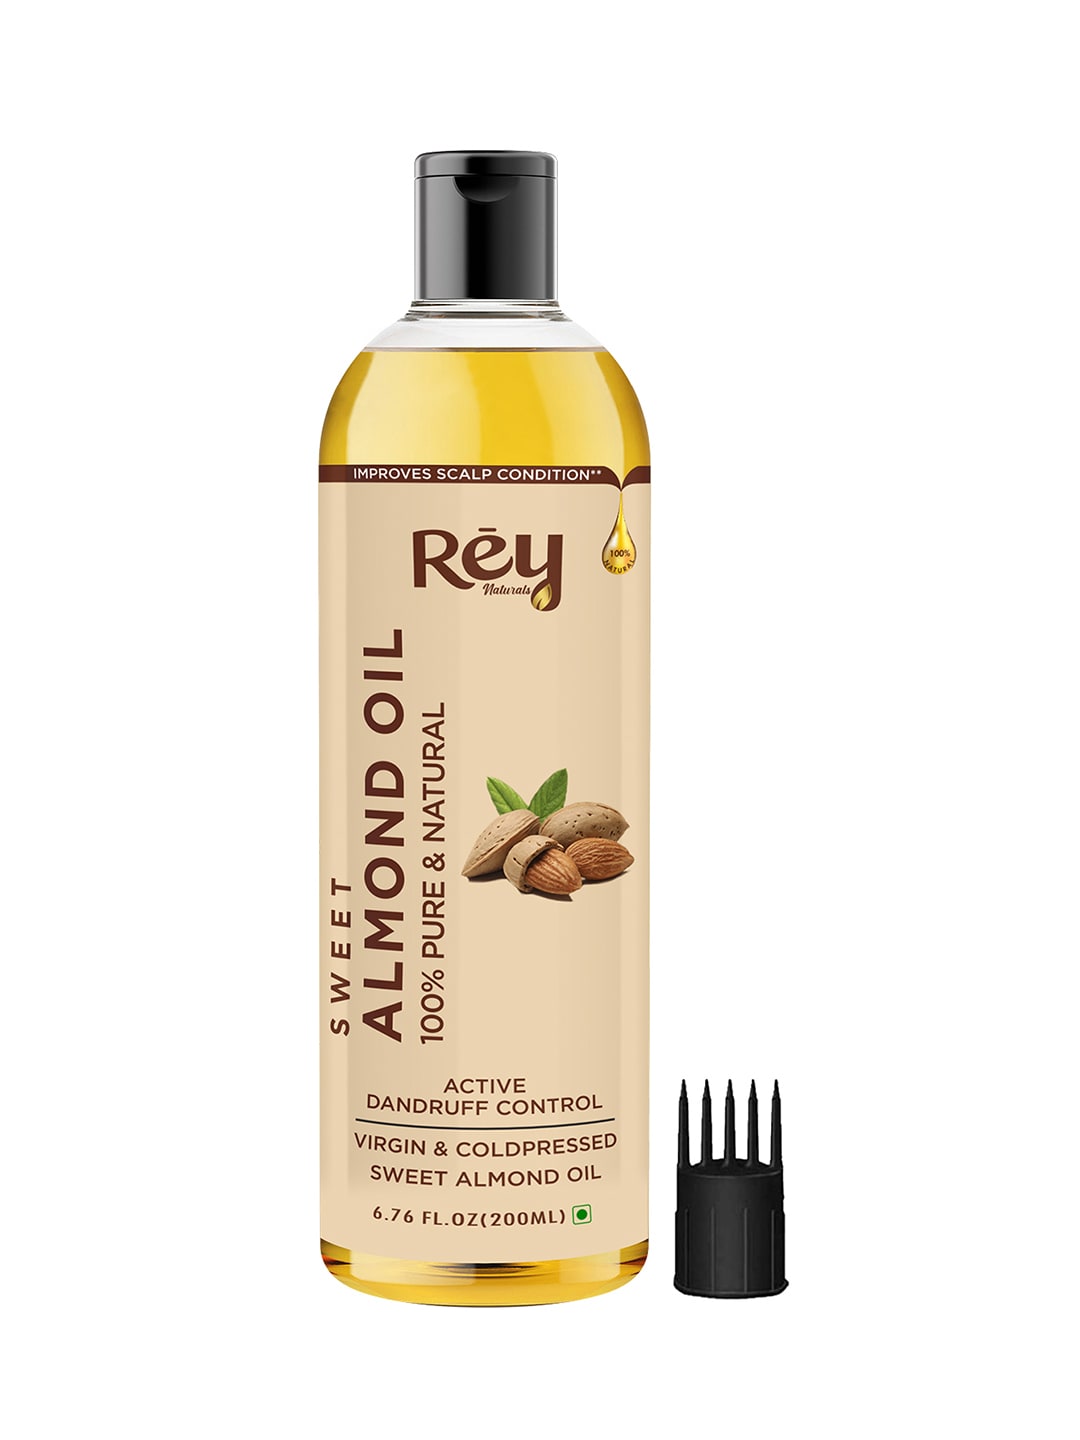 Rey Naturals Virgin & Cold Pressed Pure Sweet Almond Oil 200 ml Price in India